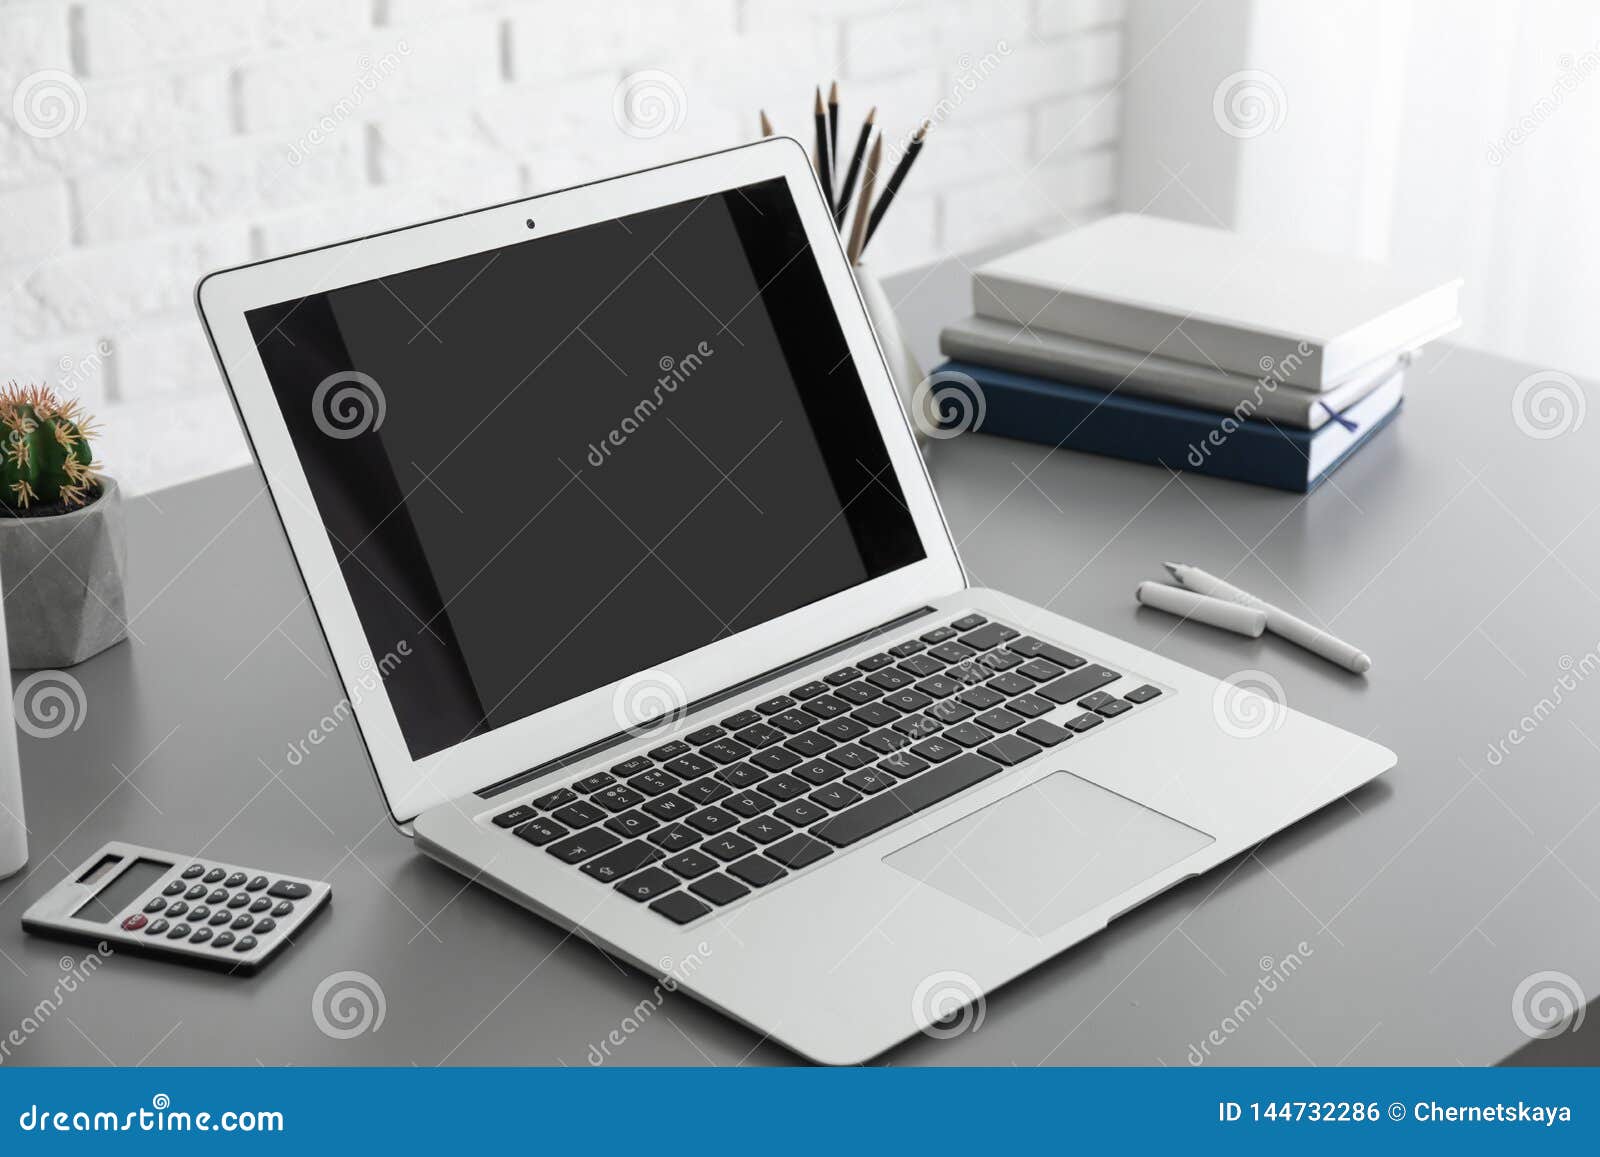 Modern Laptop With Blank Screen On Table Stock Photo Image Of Laptop